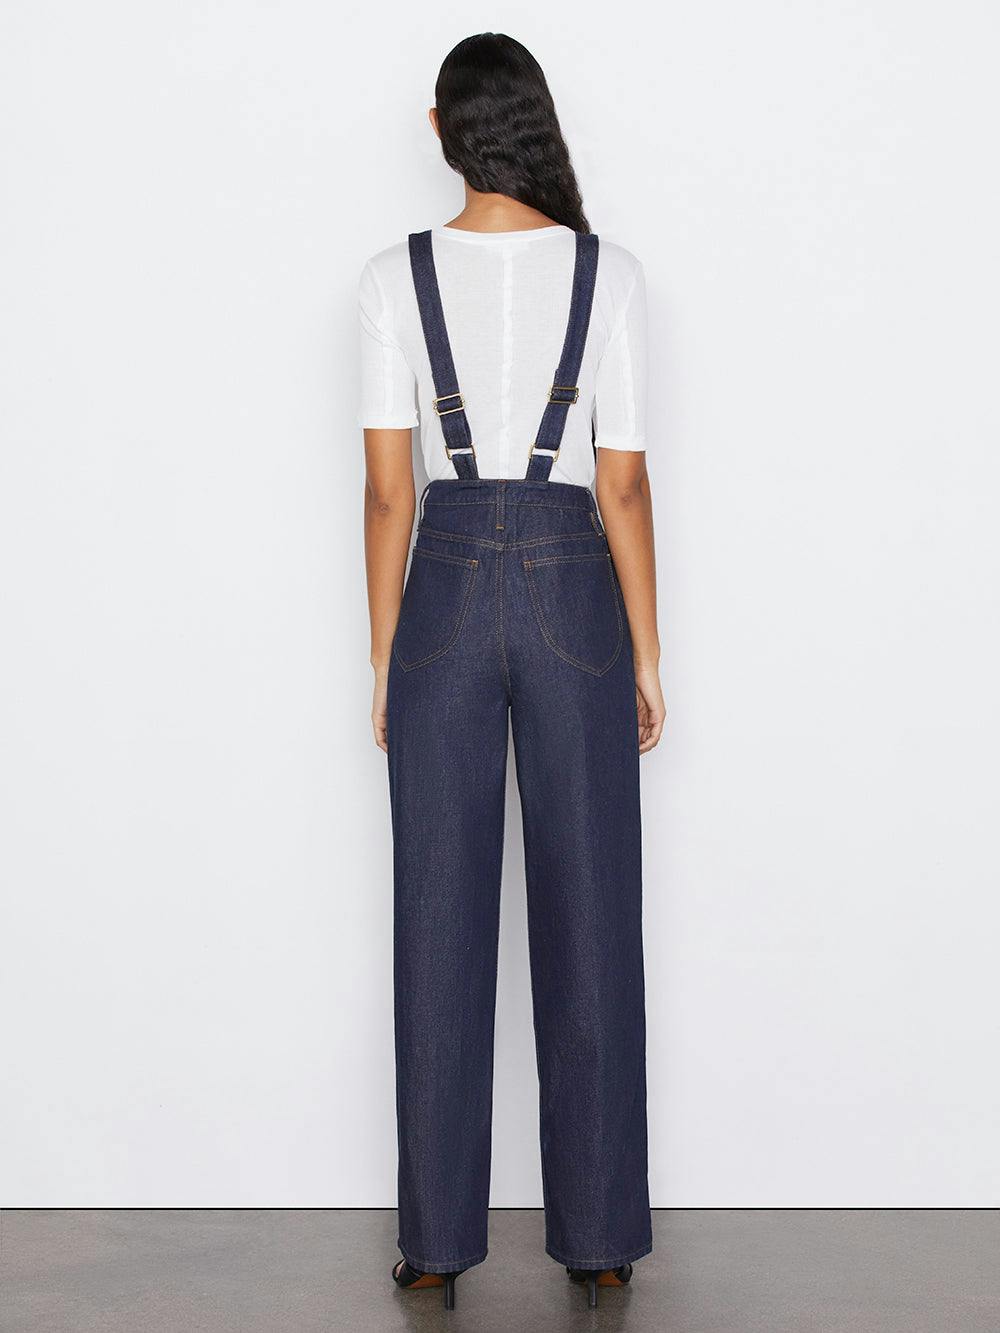 overalls back view